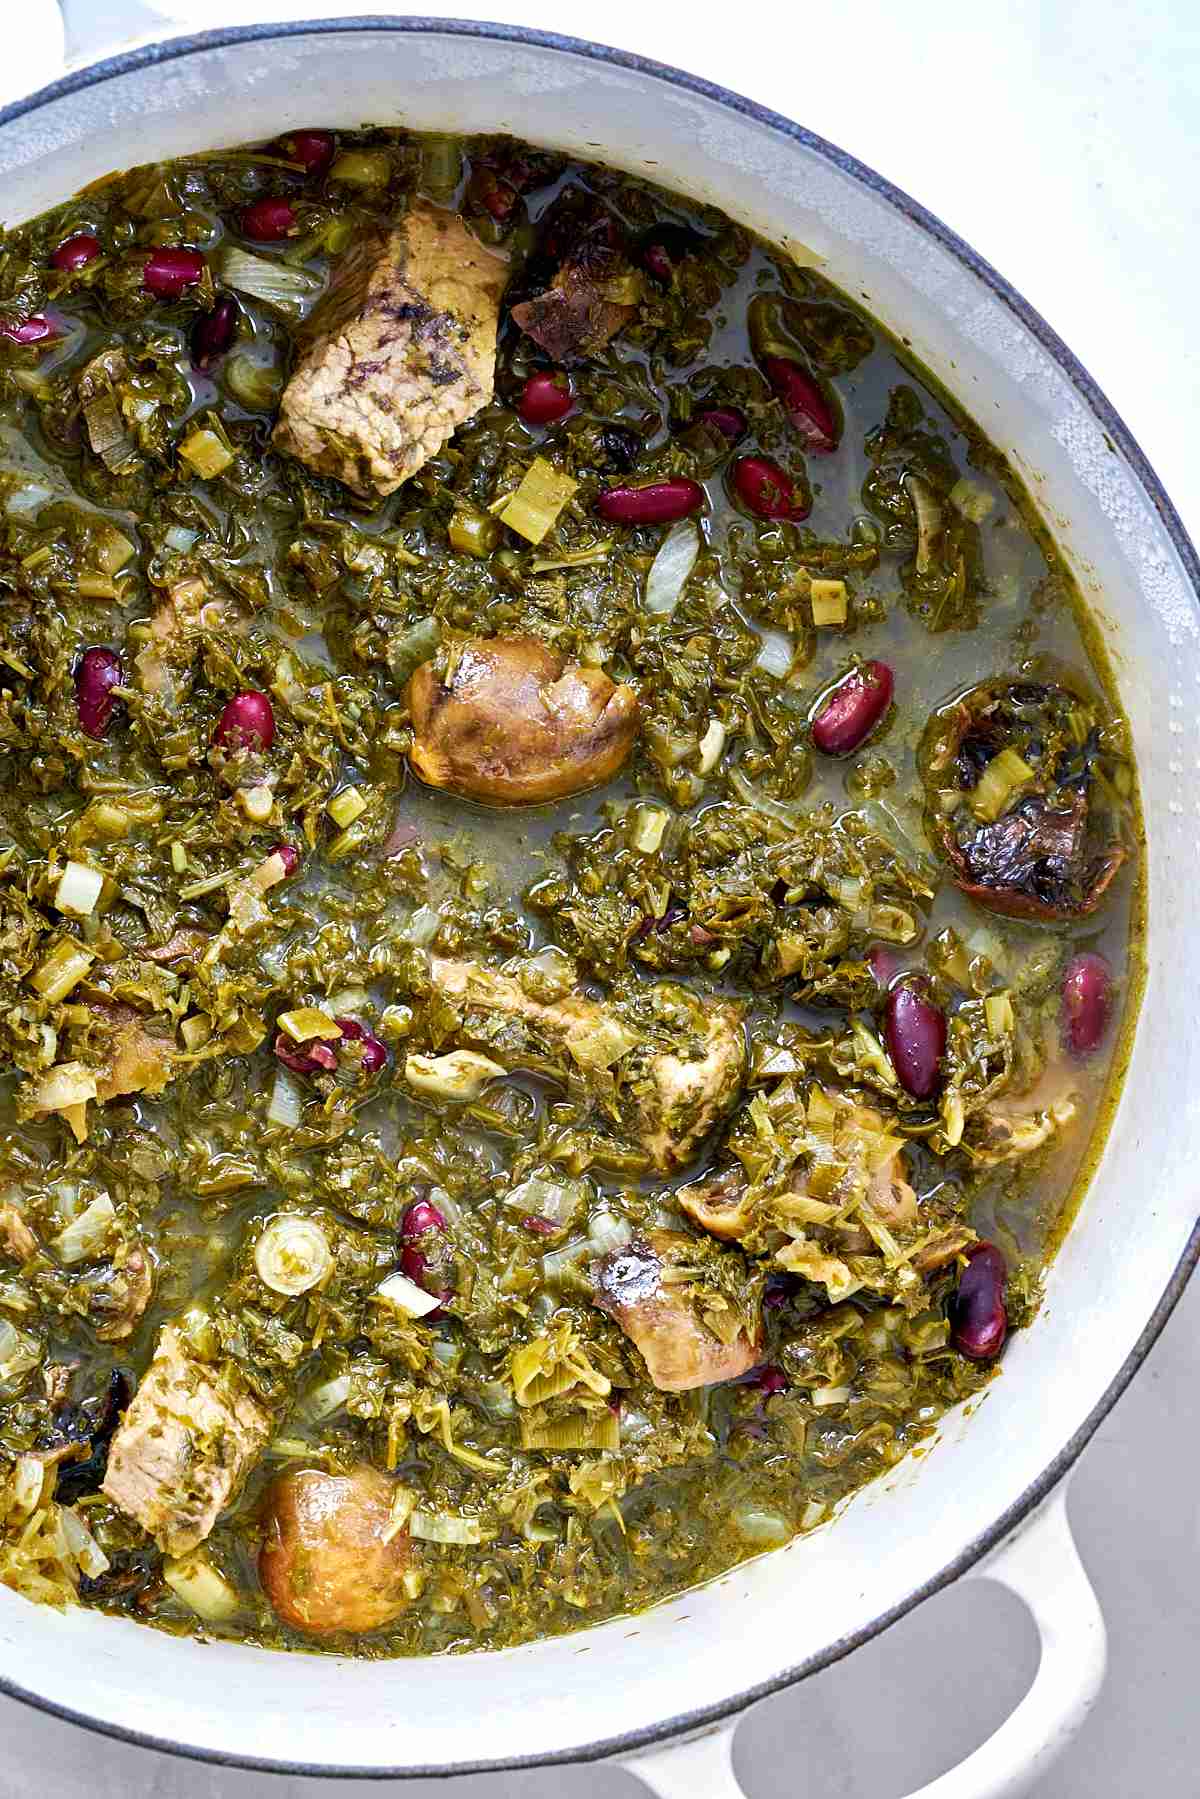 Top view of ghormeh sabzi with beef, herbs, and kidney beans.